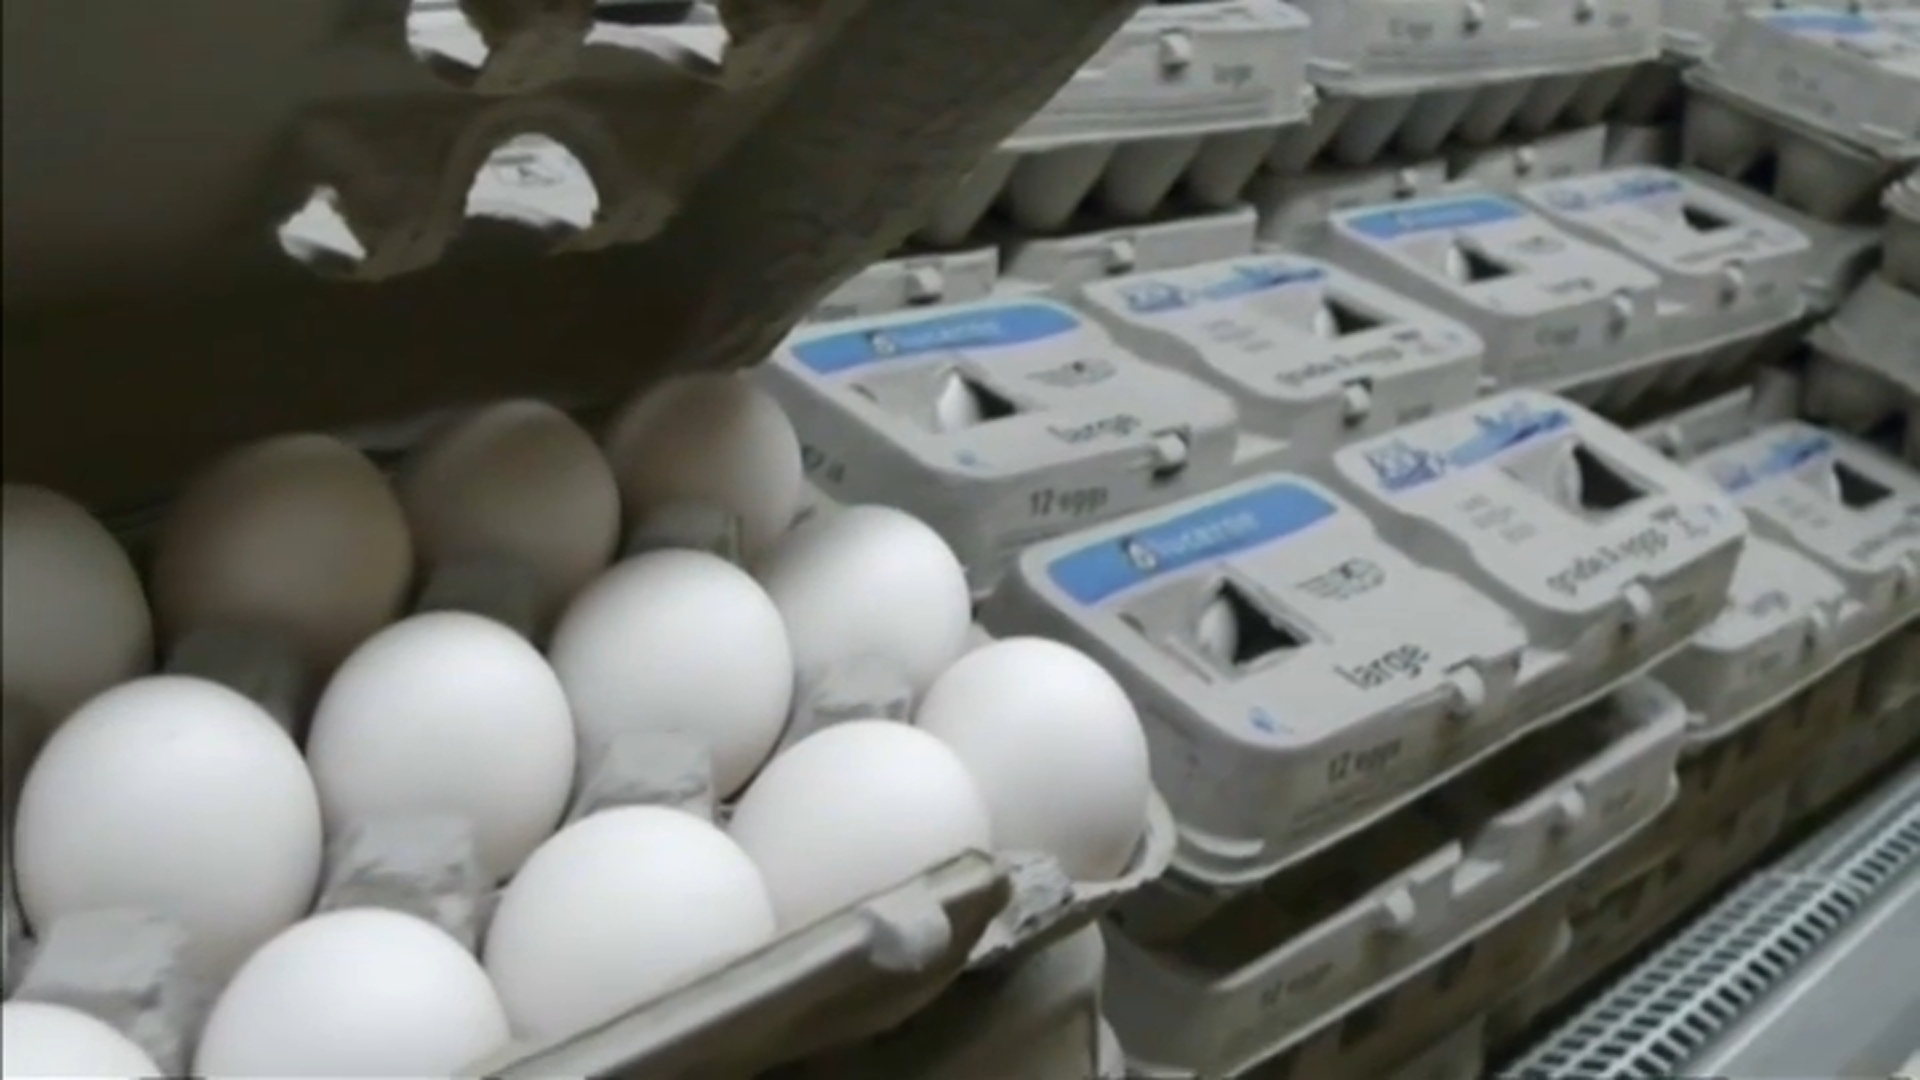 Egg Price Predictions: How Much Will Your Eggs Cost in 2022?